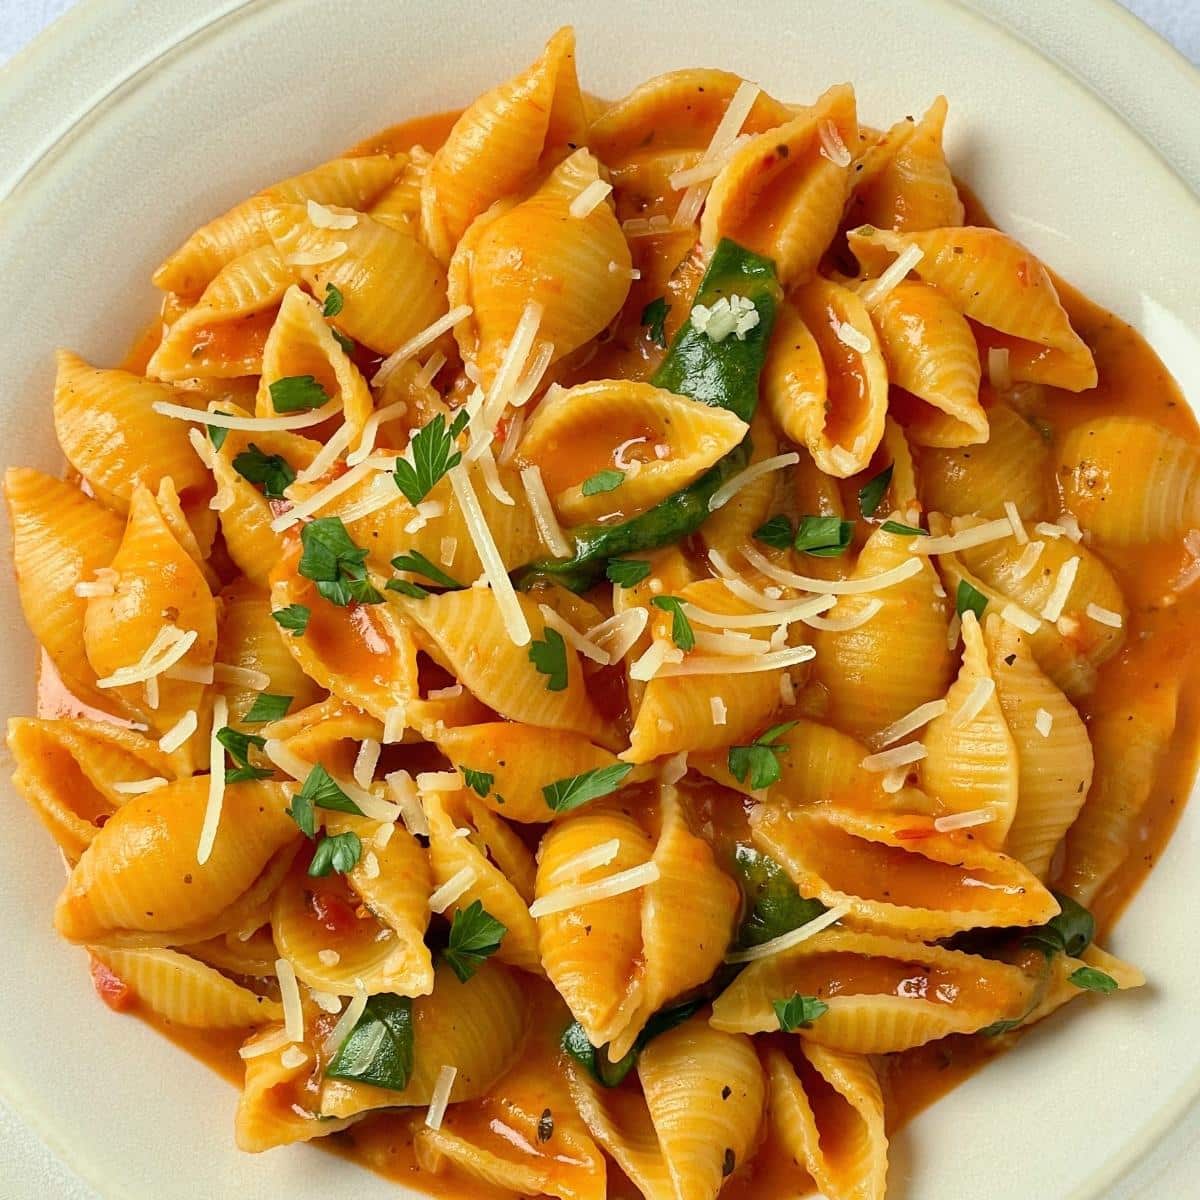 A plate of creamy vegan tomato pasta garnished with parsley.